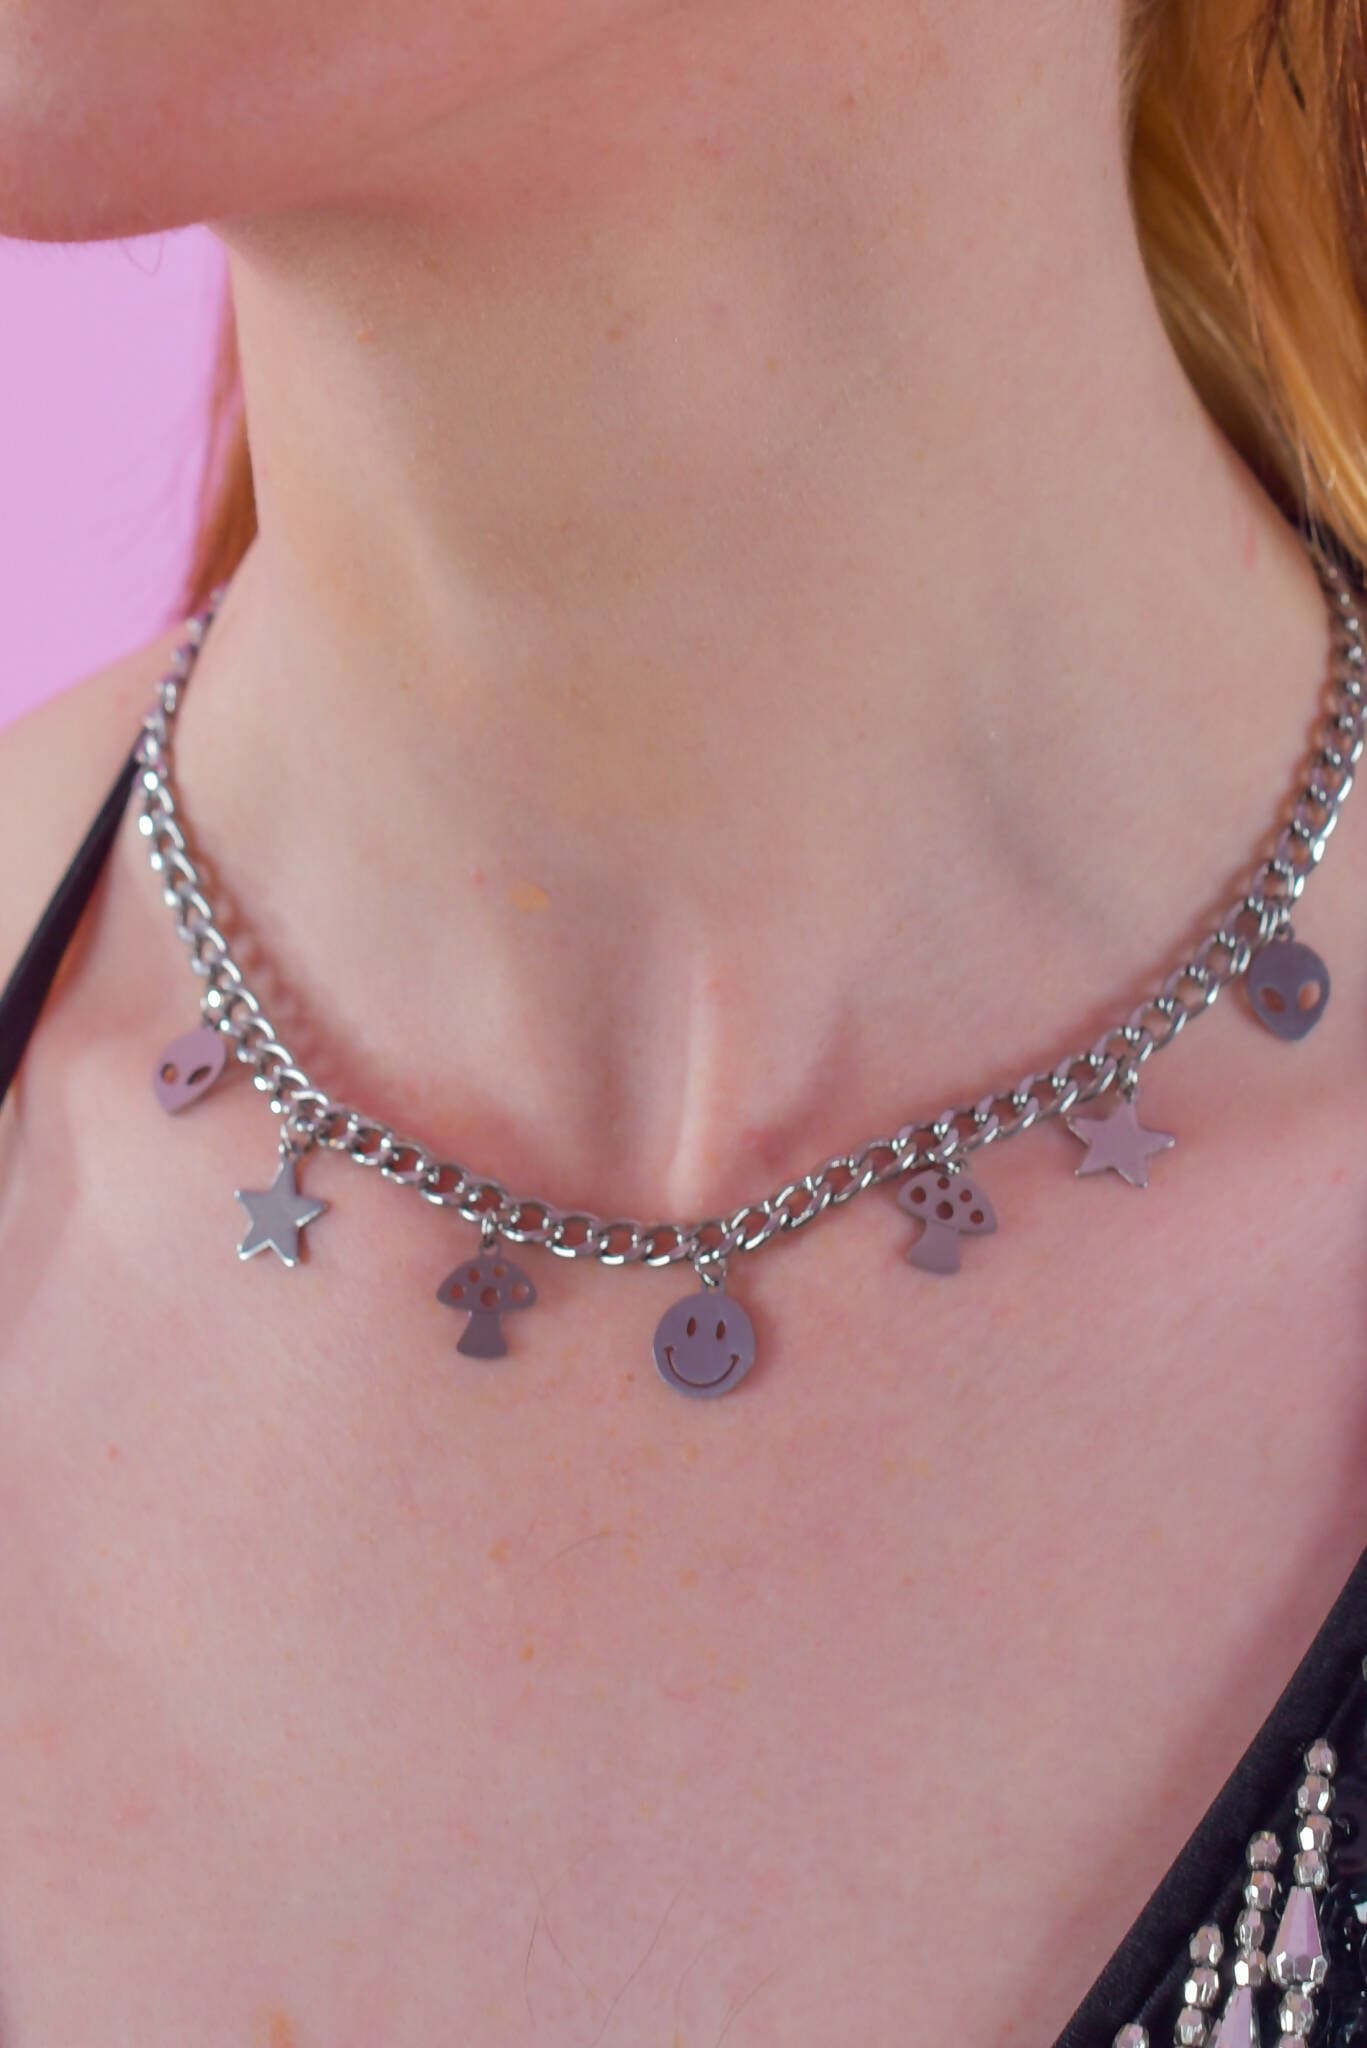 Cosmic Charm Chain necklace | Rave &amp; Festival Fashion